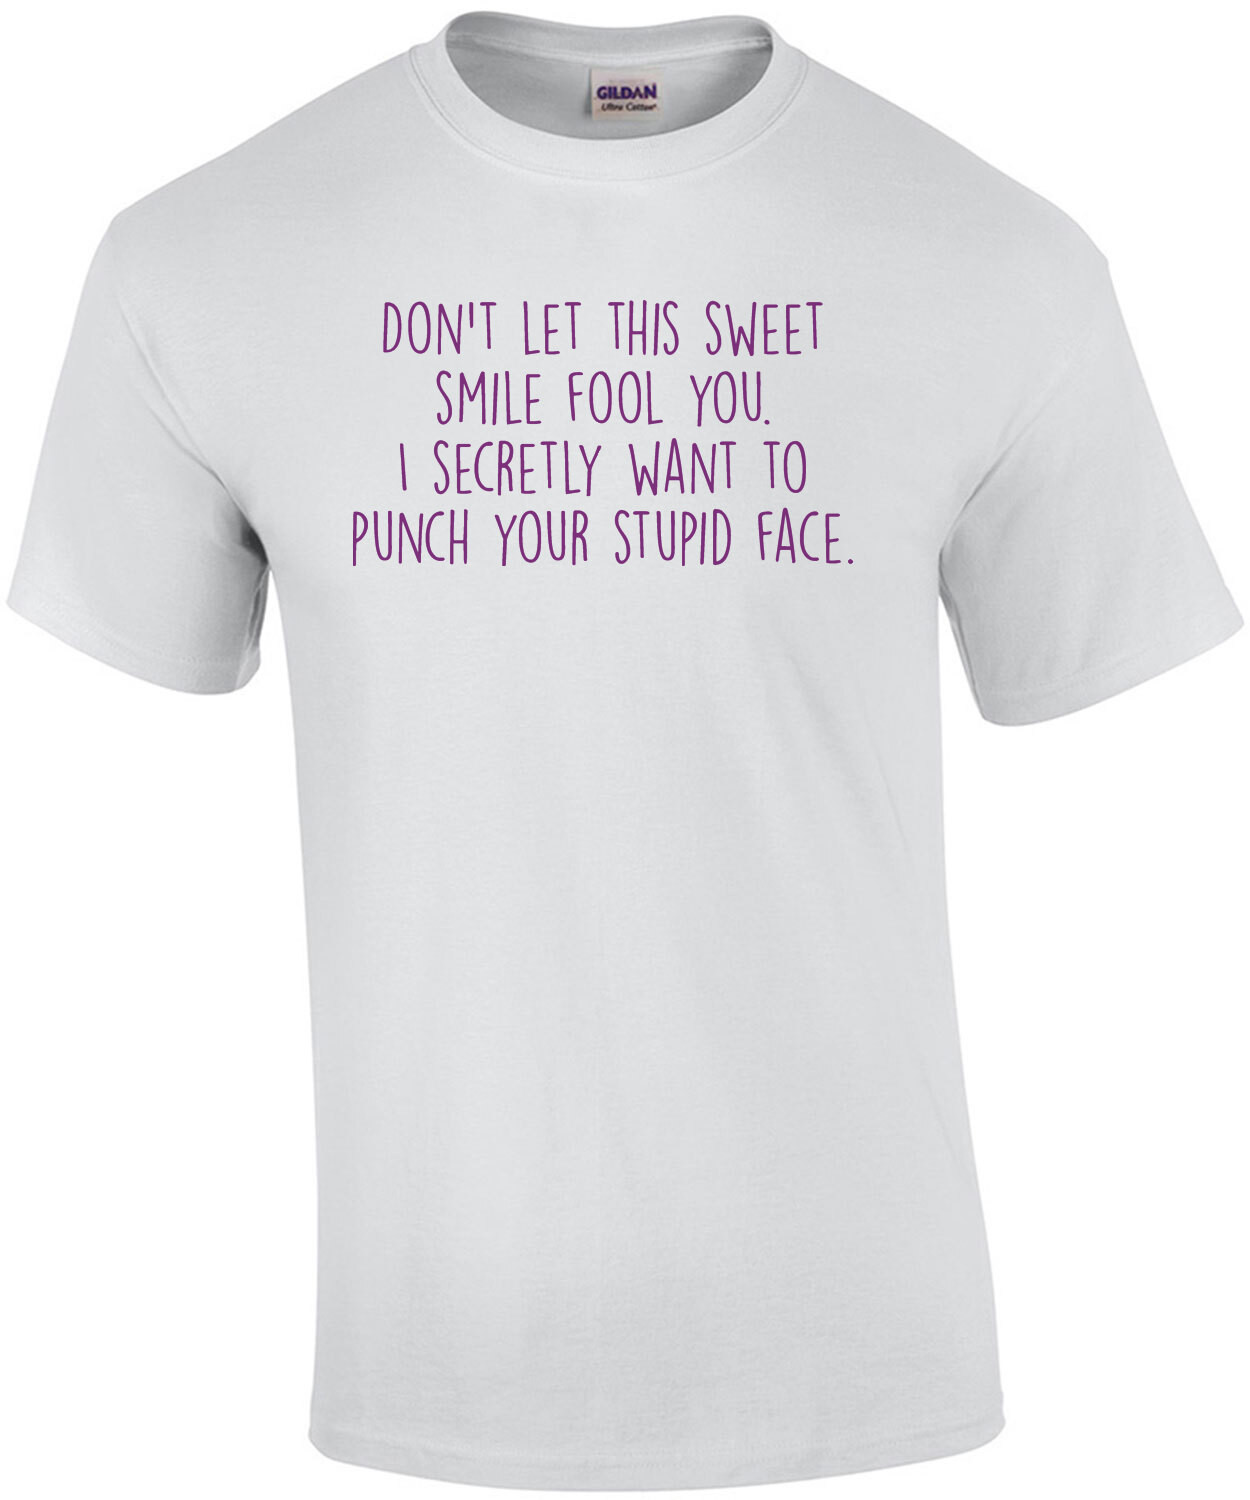 Don't let this sweet smile fool you. I secretly want to punch your stupid face. Funny rude ladies t-shirt